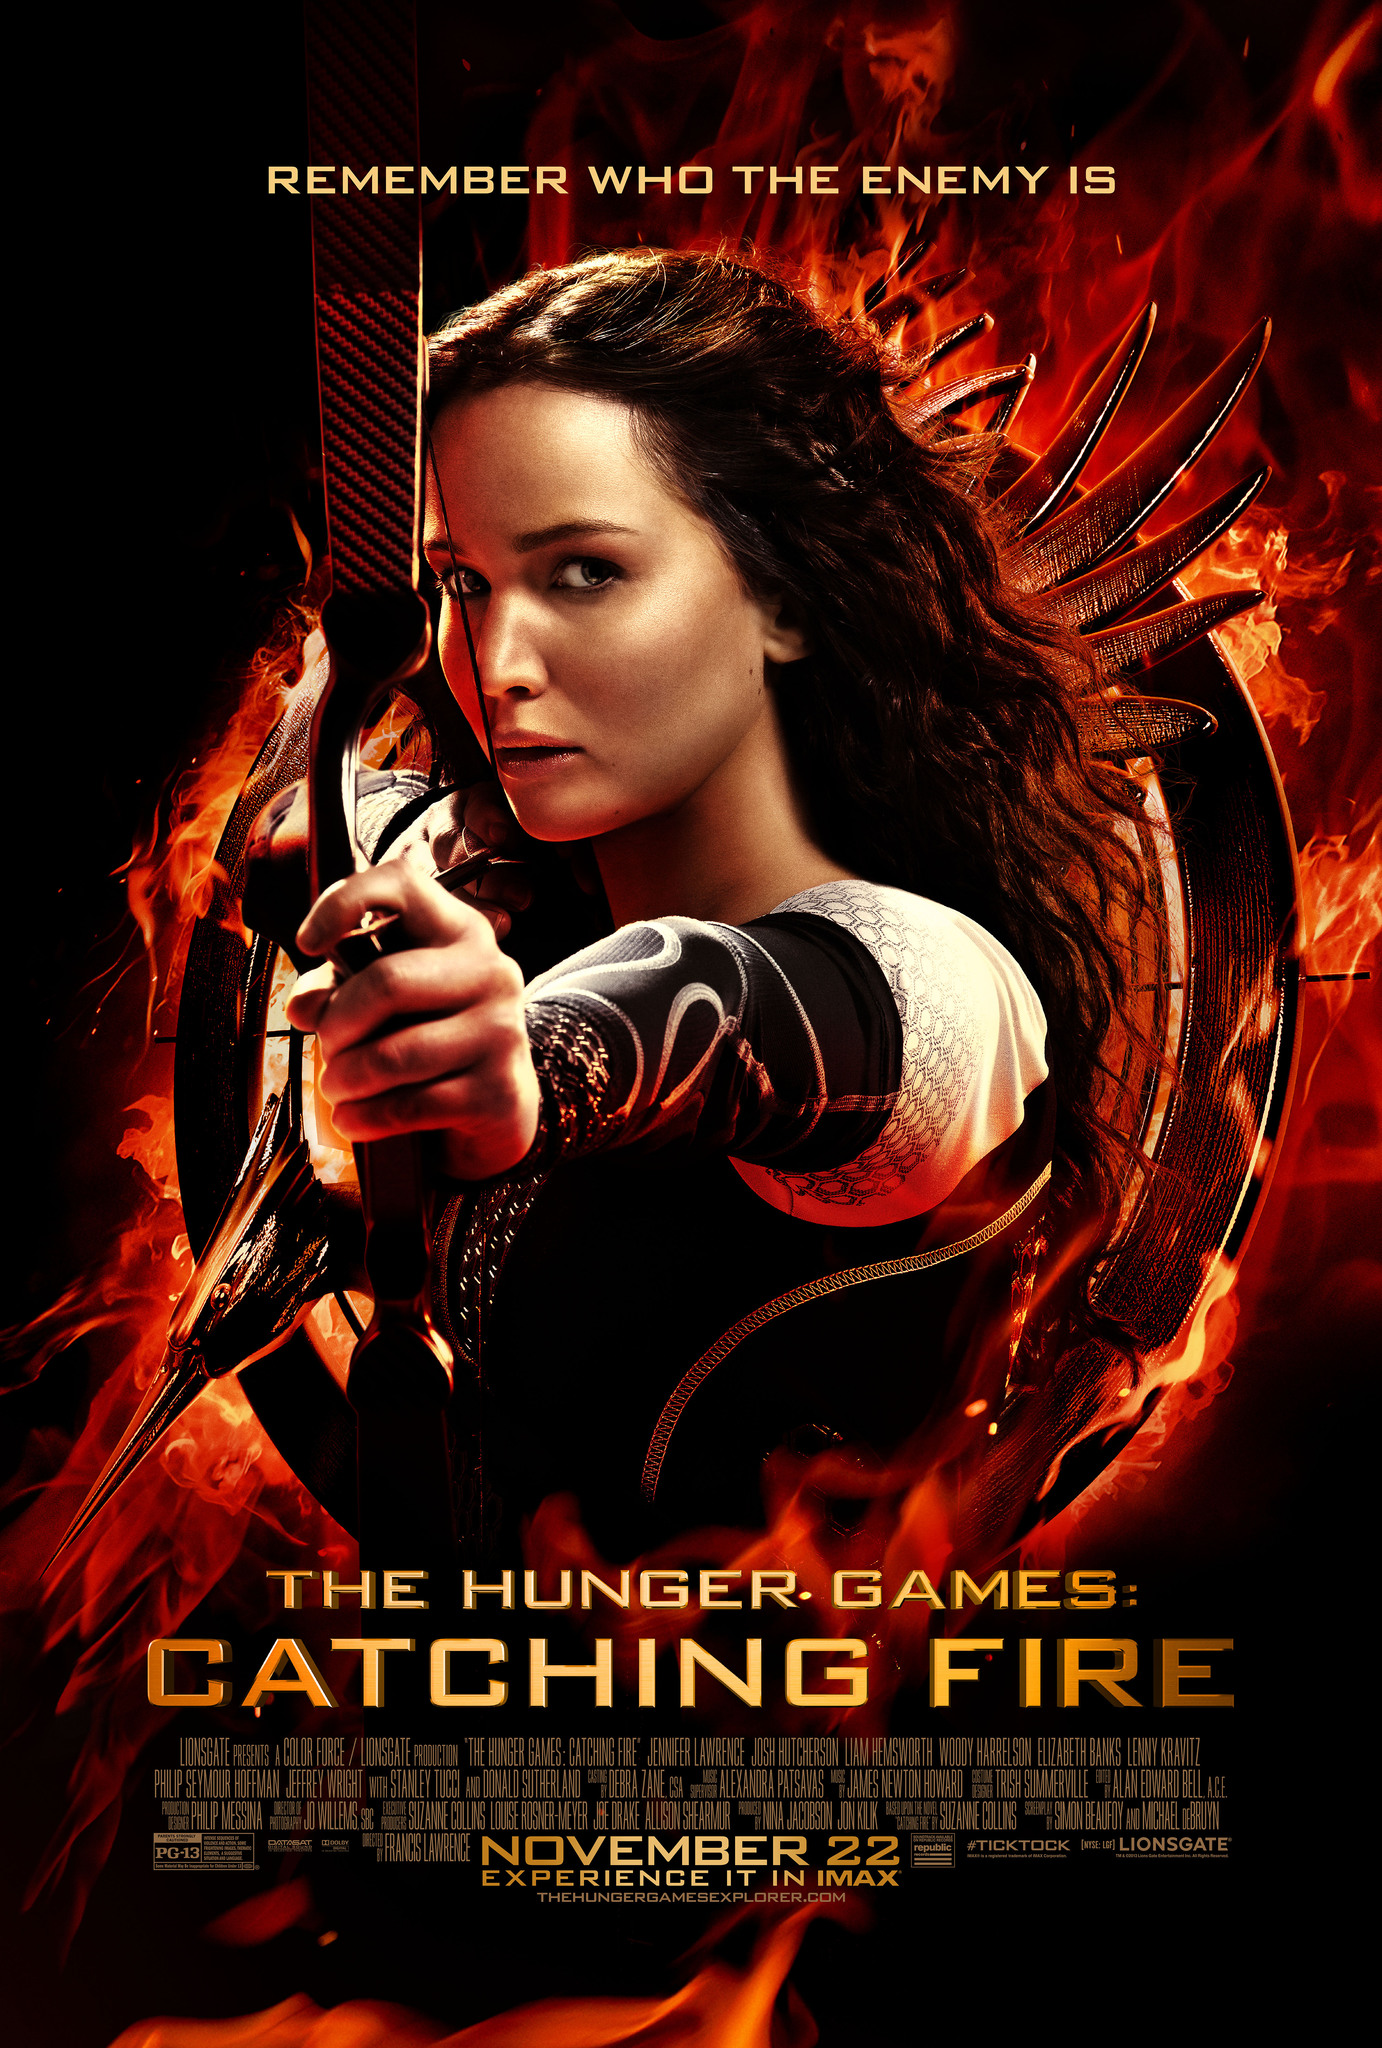 The Hunger Games: Catching Fire (2013), English Voice Over Wikia